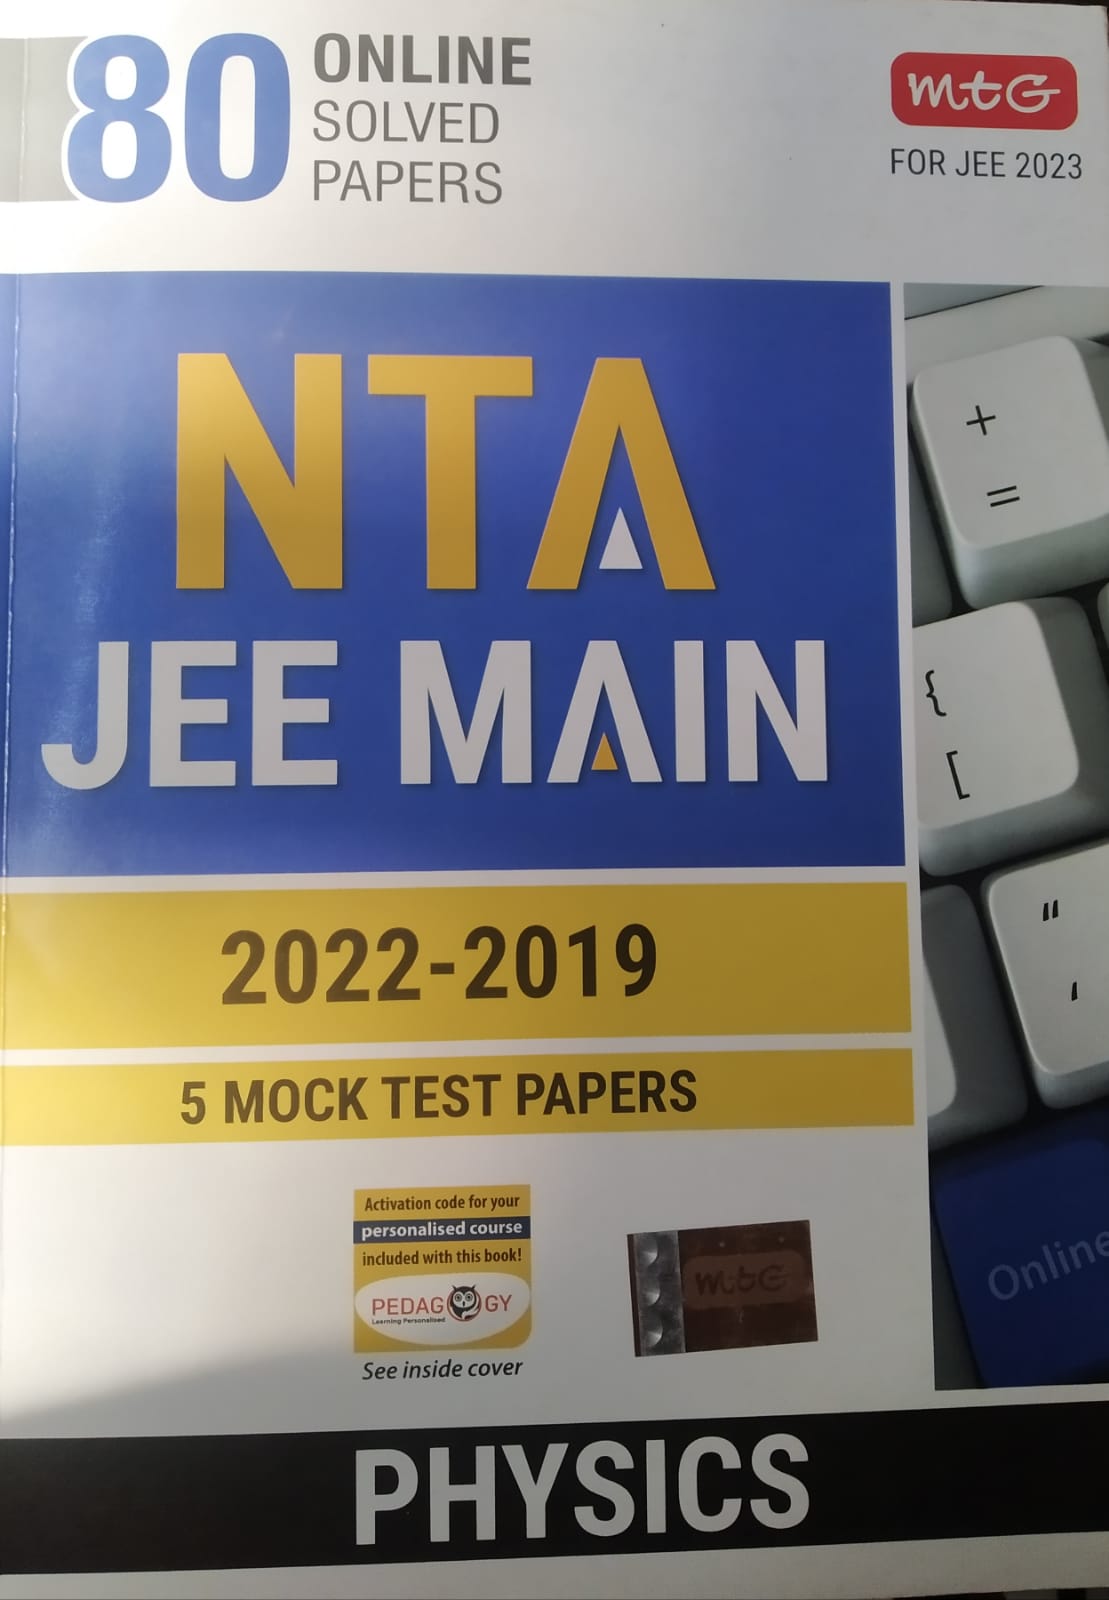 MTG NTA JEE Main ( 2022-2019) 5 Mock Test Papers Physics (MTG 80 Online Solved Papers)